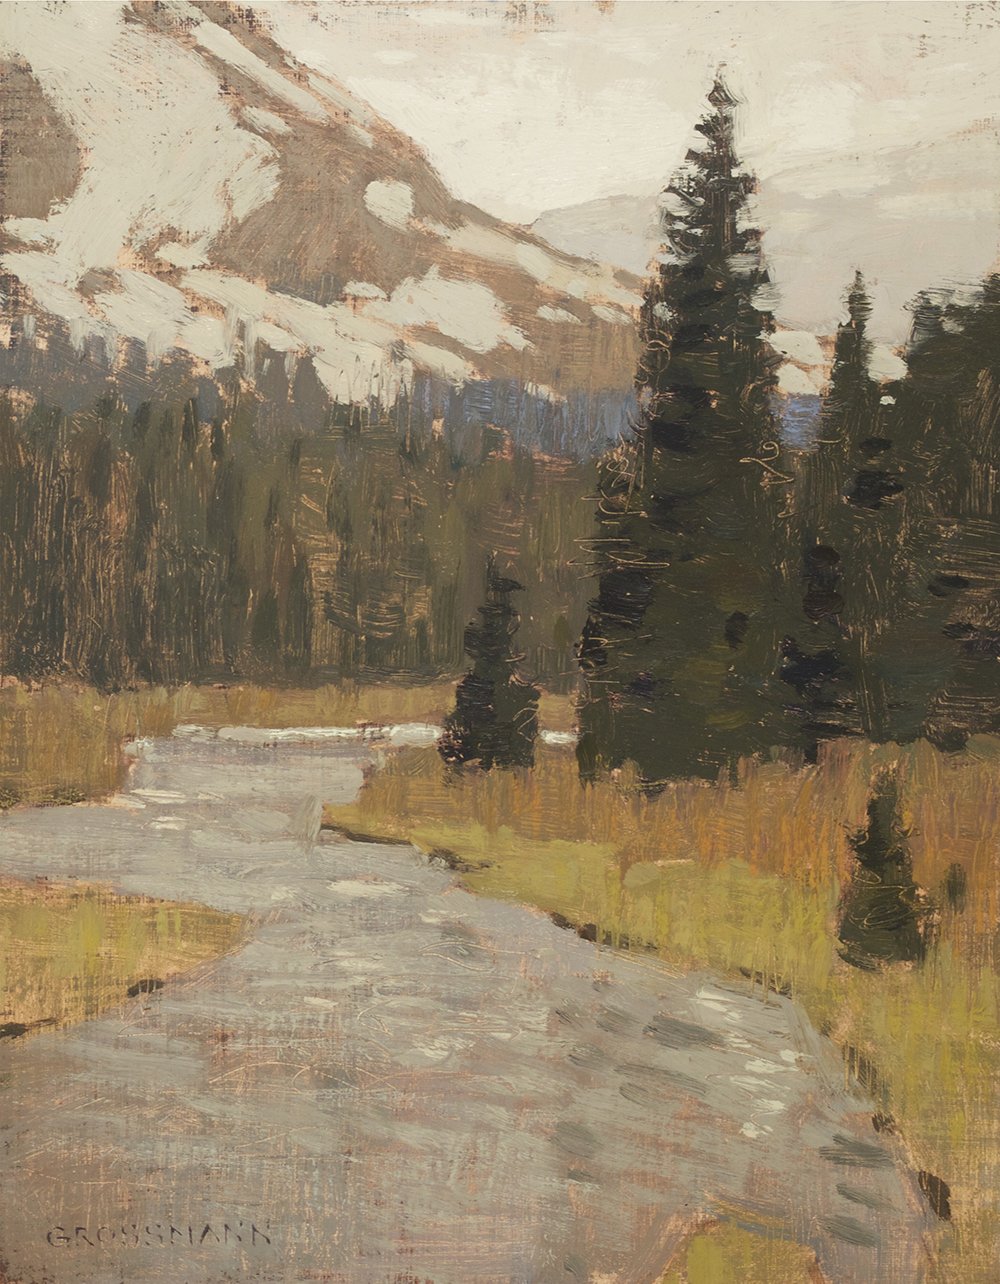 DG16-09 Snowmelt and Mountain Patches 10x8  Oil on Linen Panel $1,200F WEB